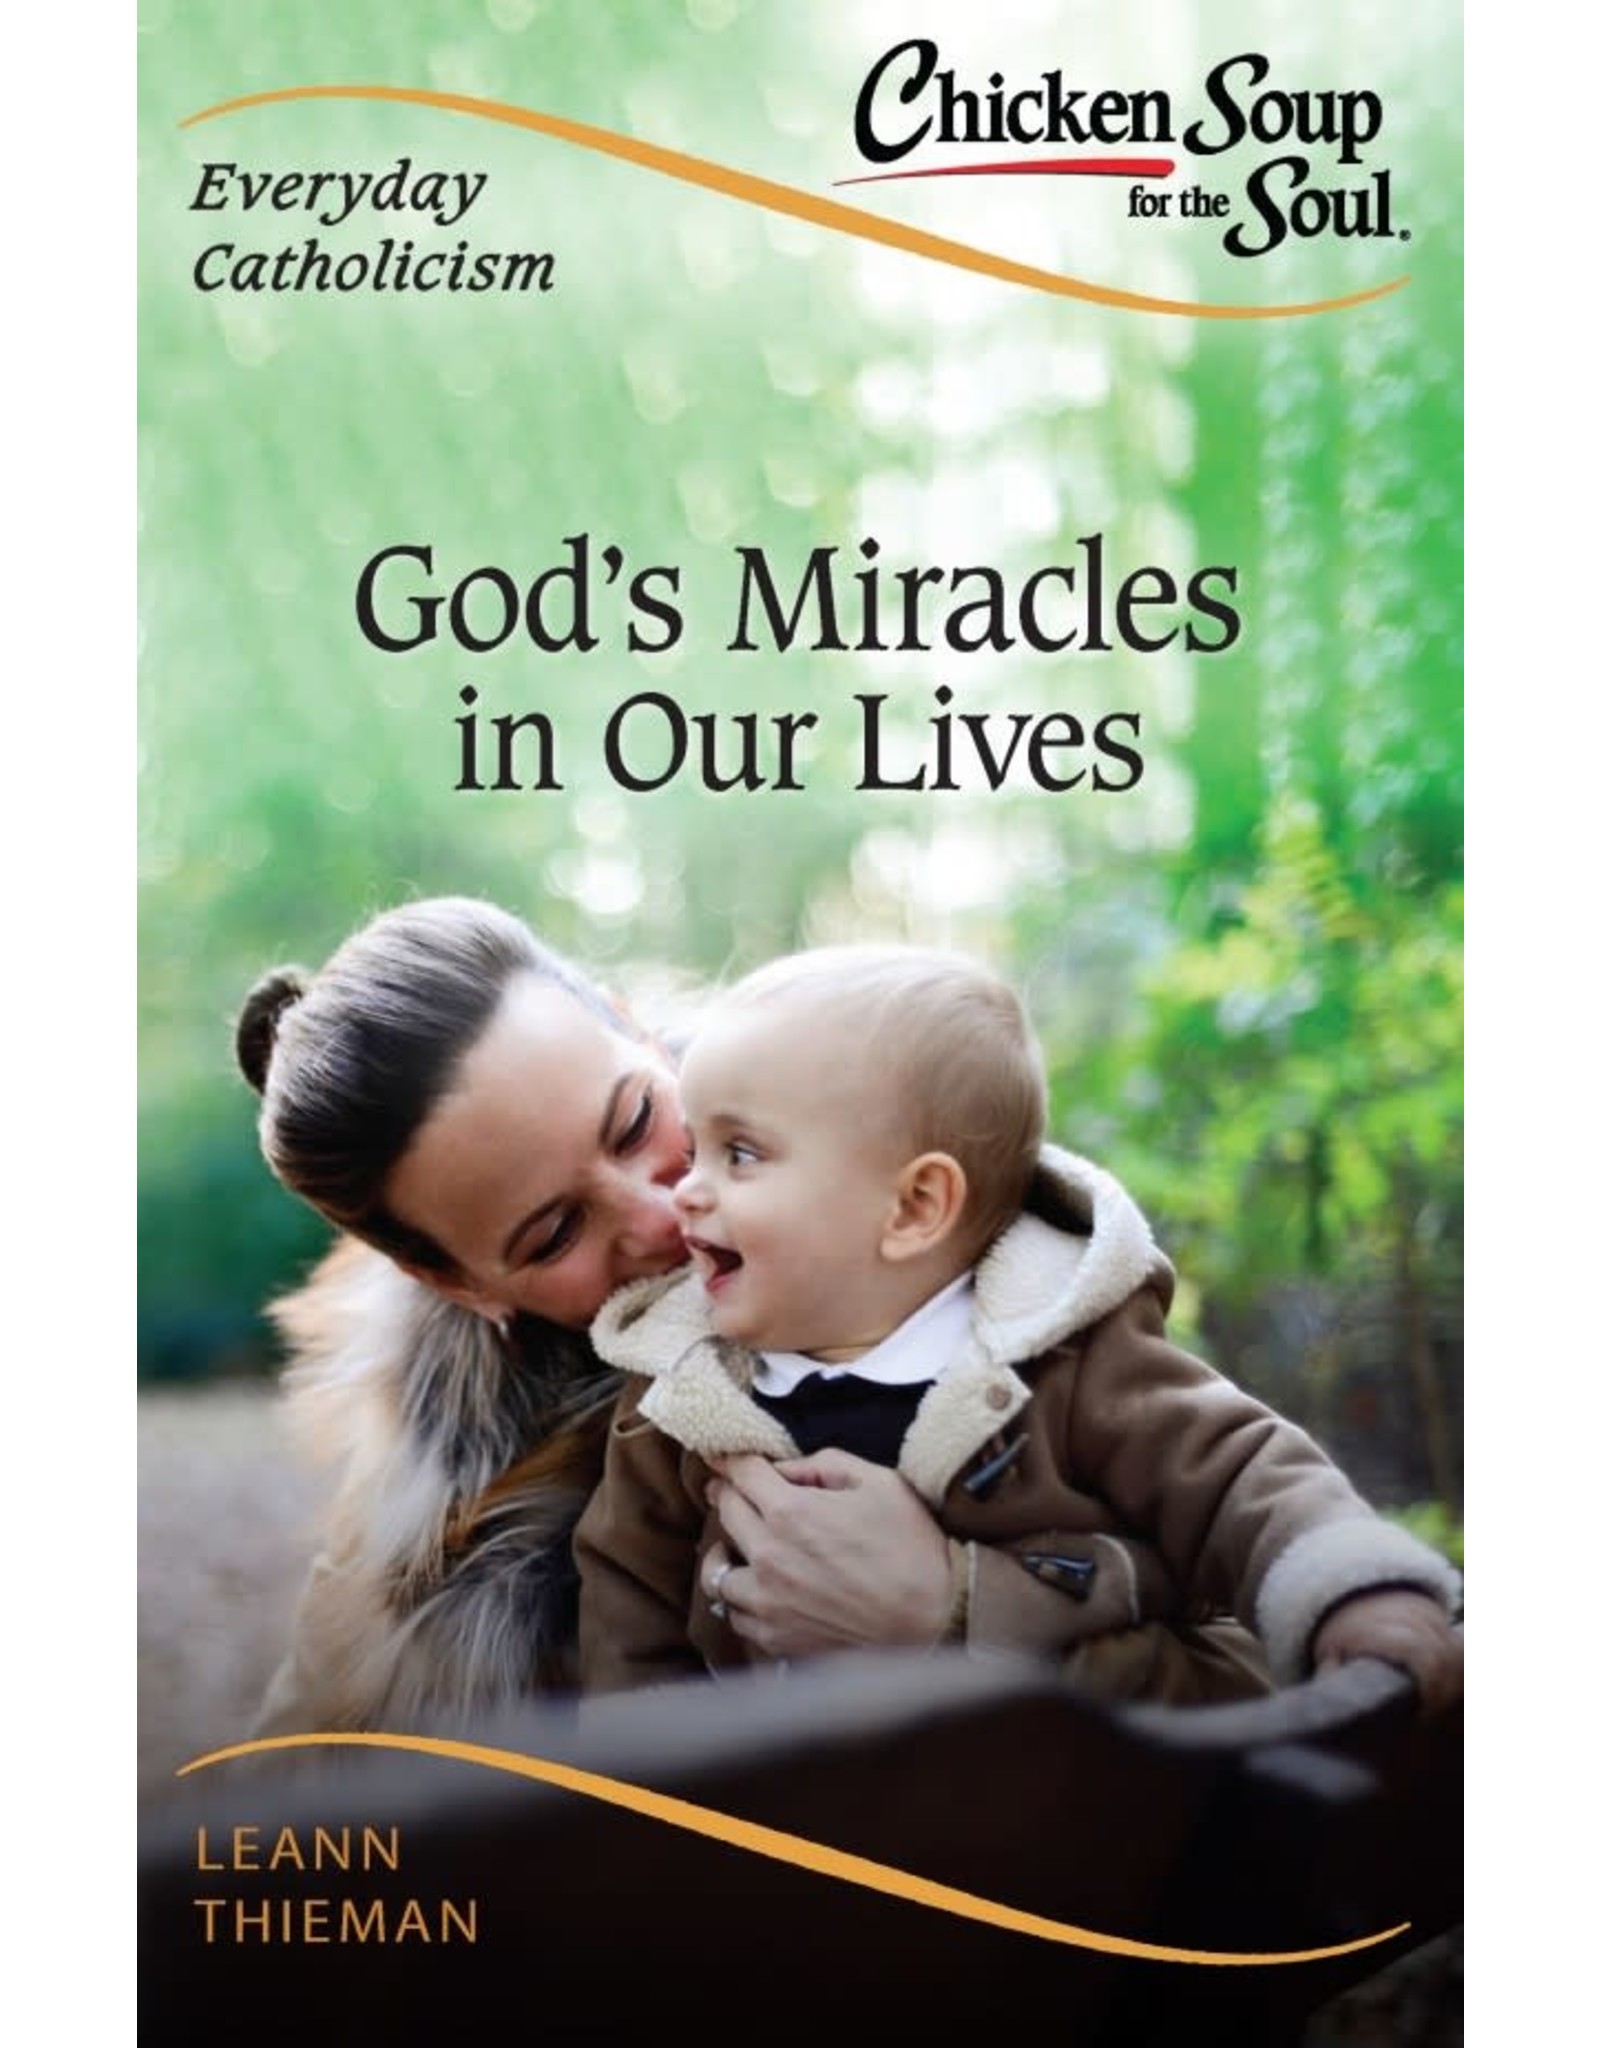 Sophia Press Chicken Soup for the Soul: Everyday Catholicism: God's Miracles in Our Lives by Leann Thieman (Paperback)